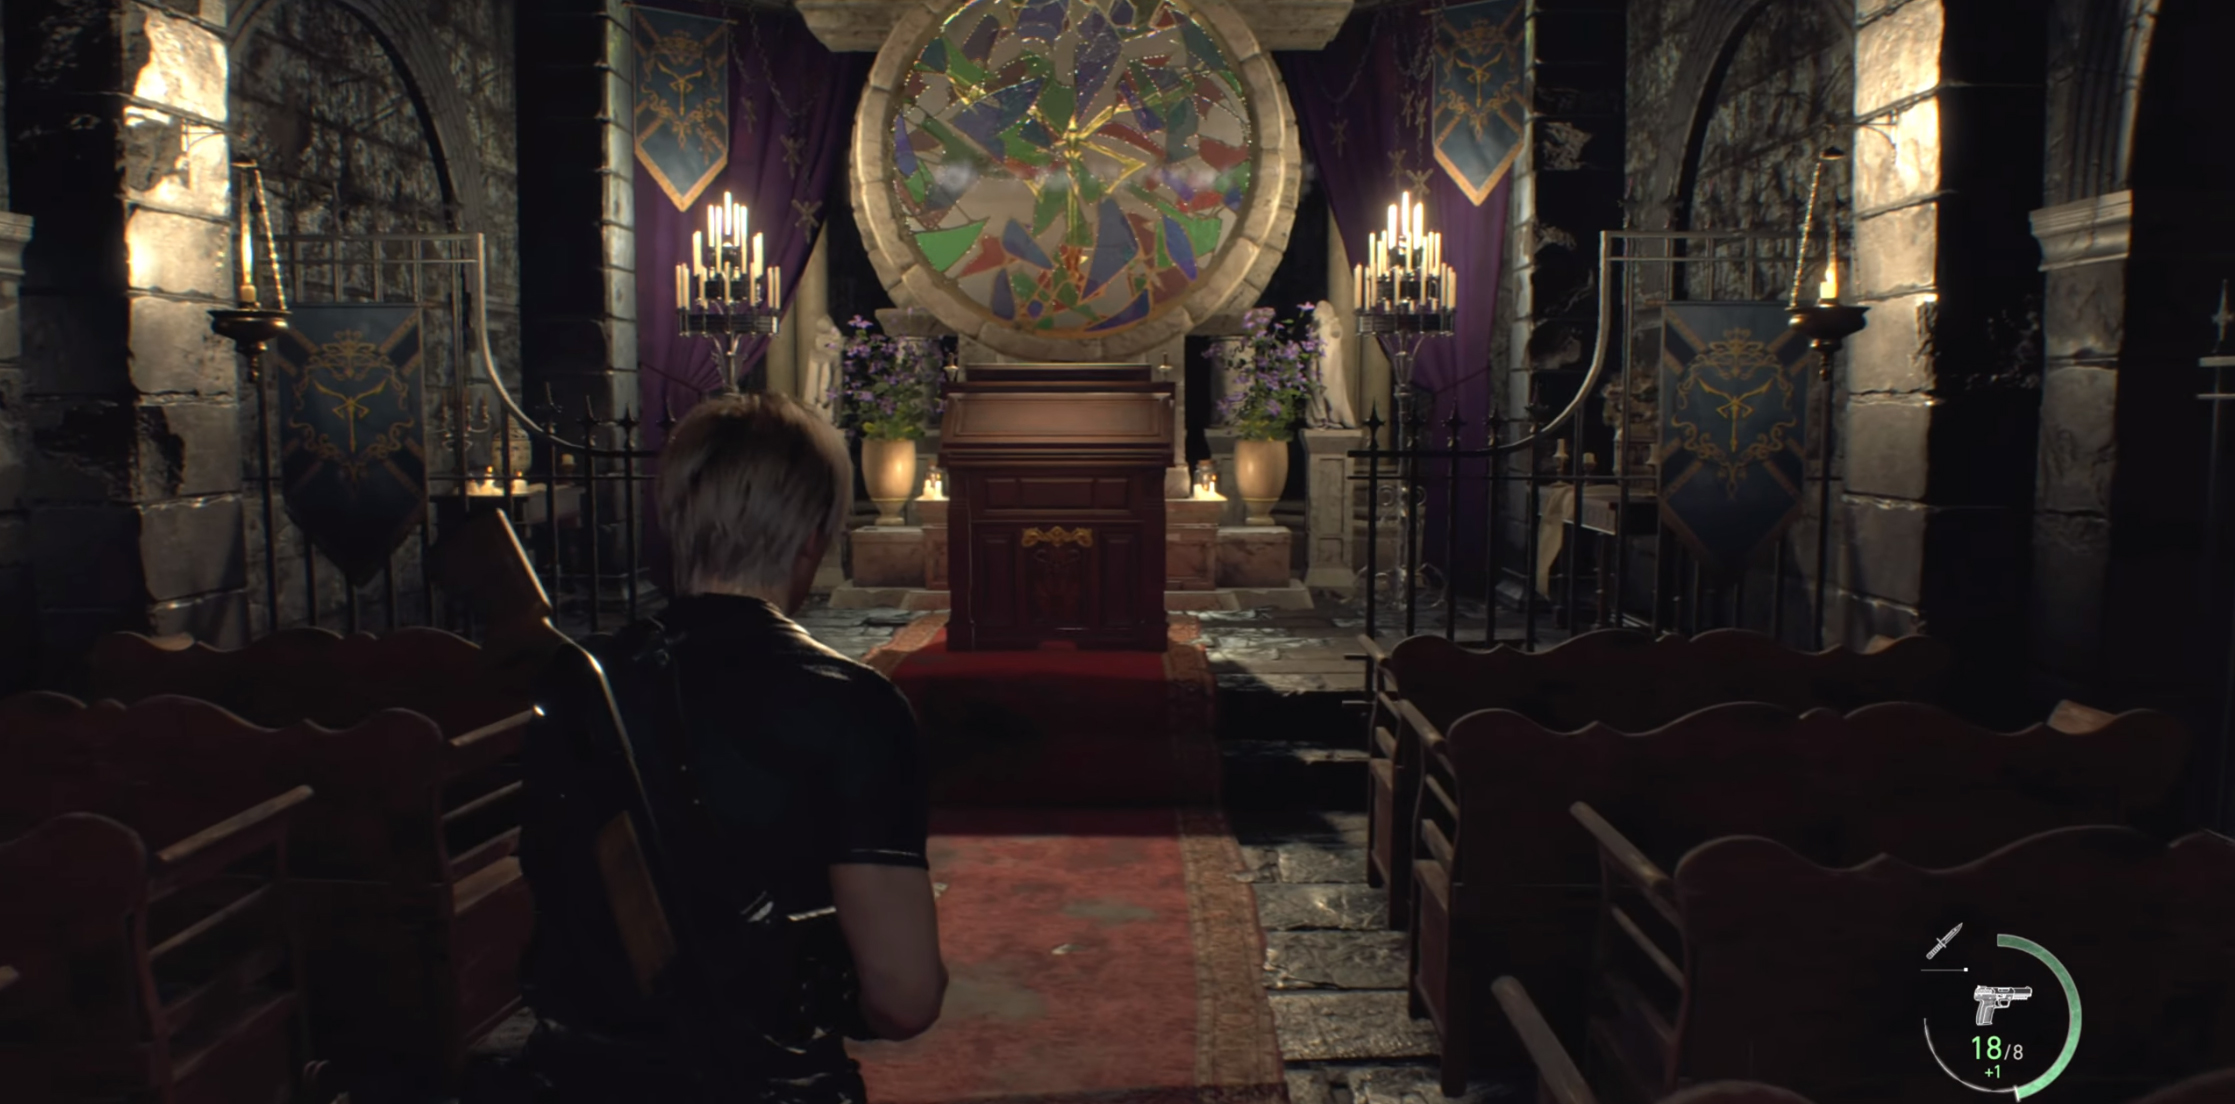 Resident Evil 4 remake Church puzzle solution: Rotate the stained